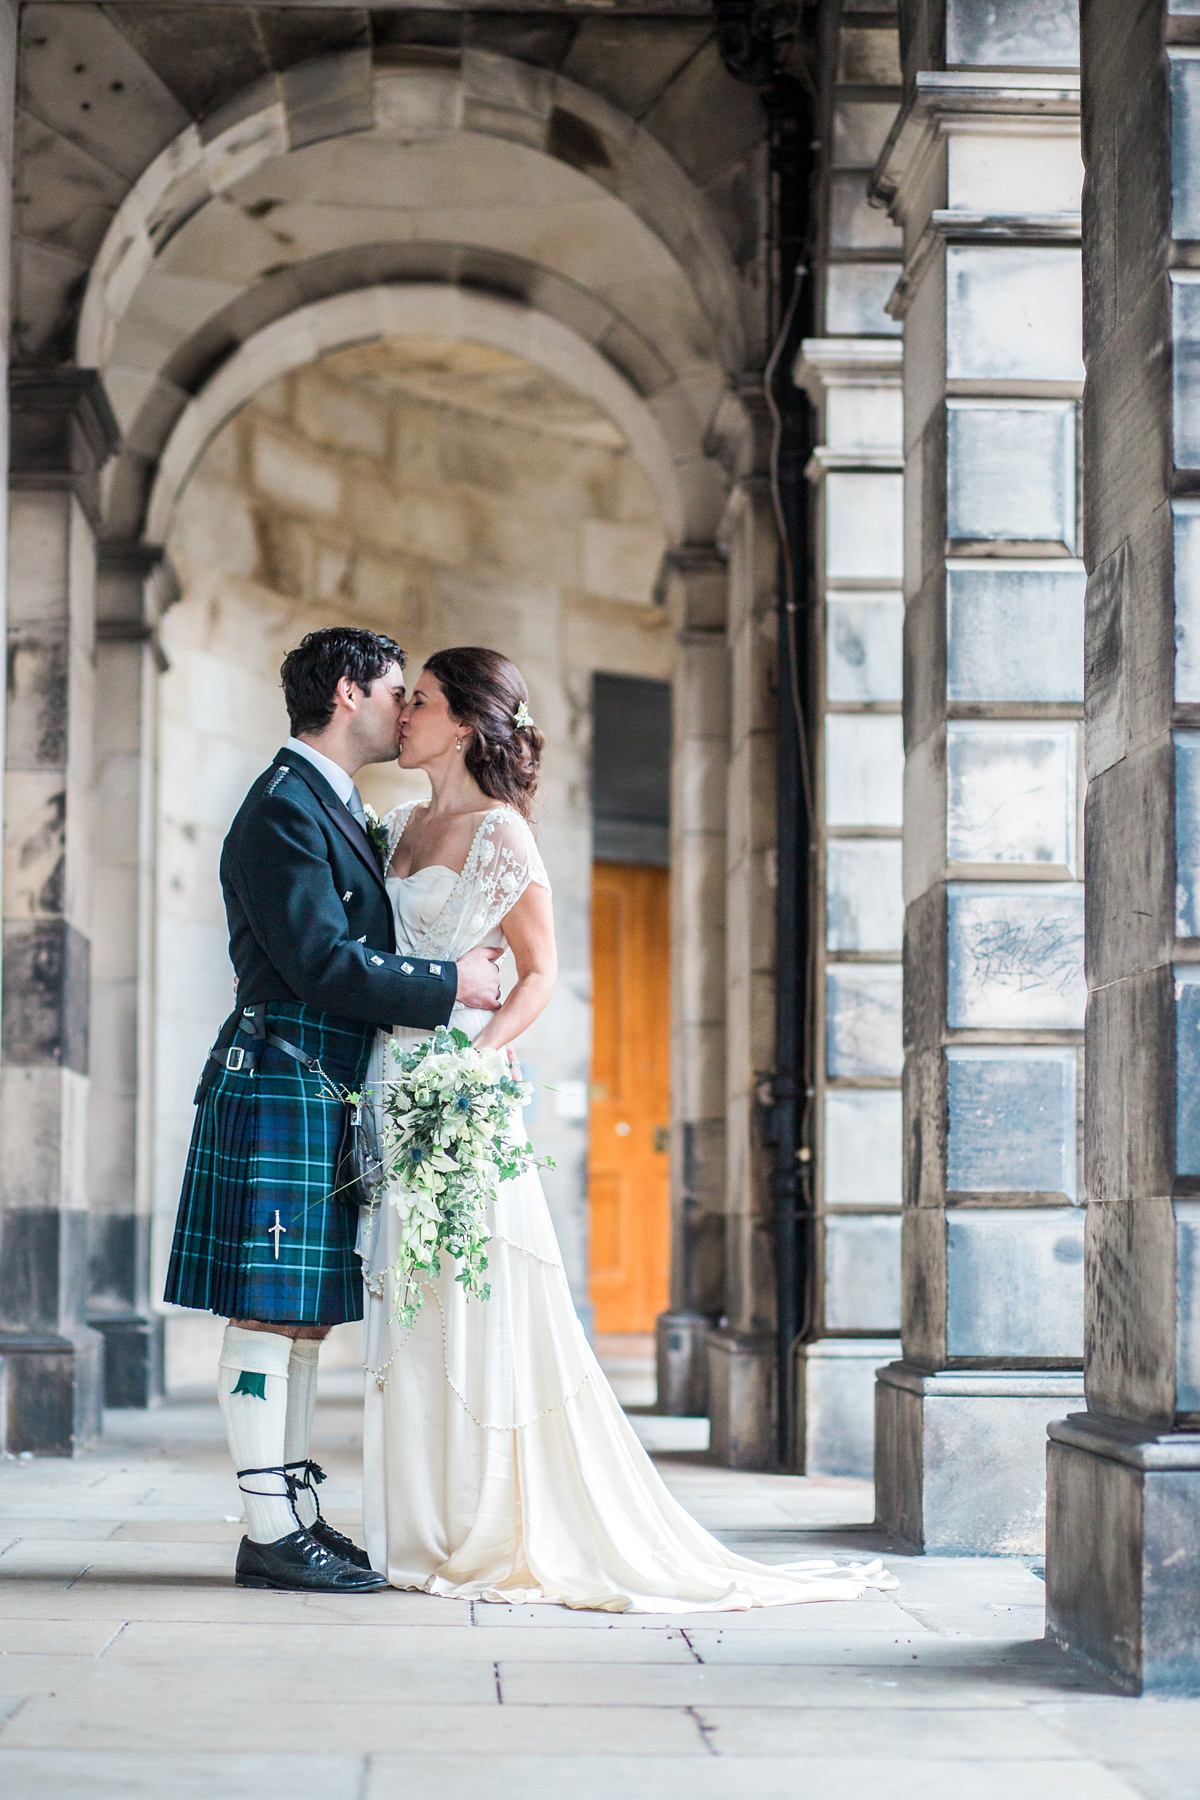 The bride wore a Catherine Deane gown for her Autumn wedding in Edinburgh. Photography by Carley Buick.